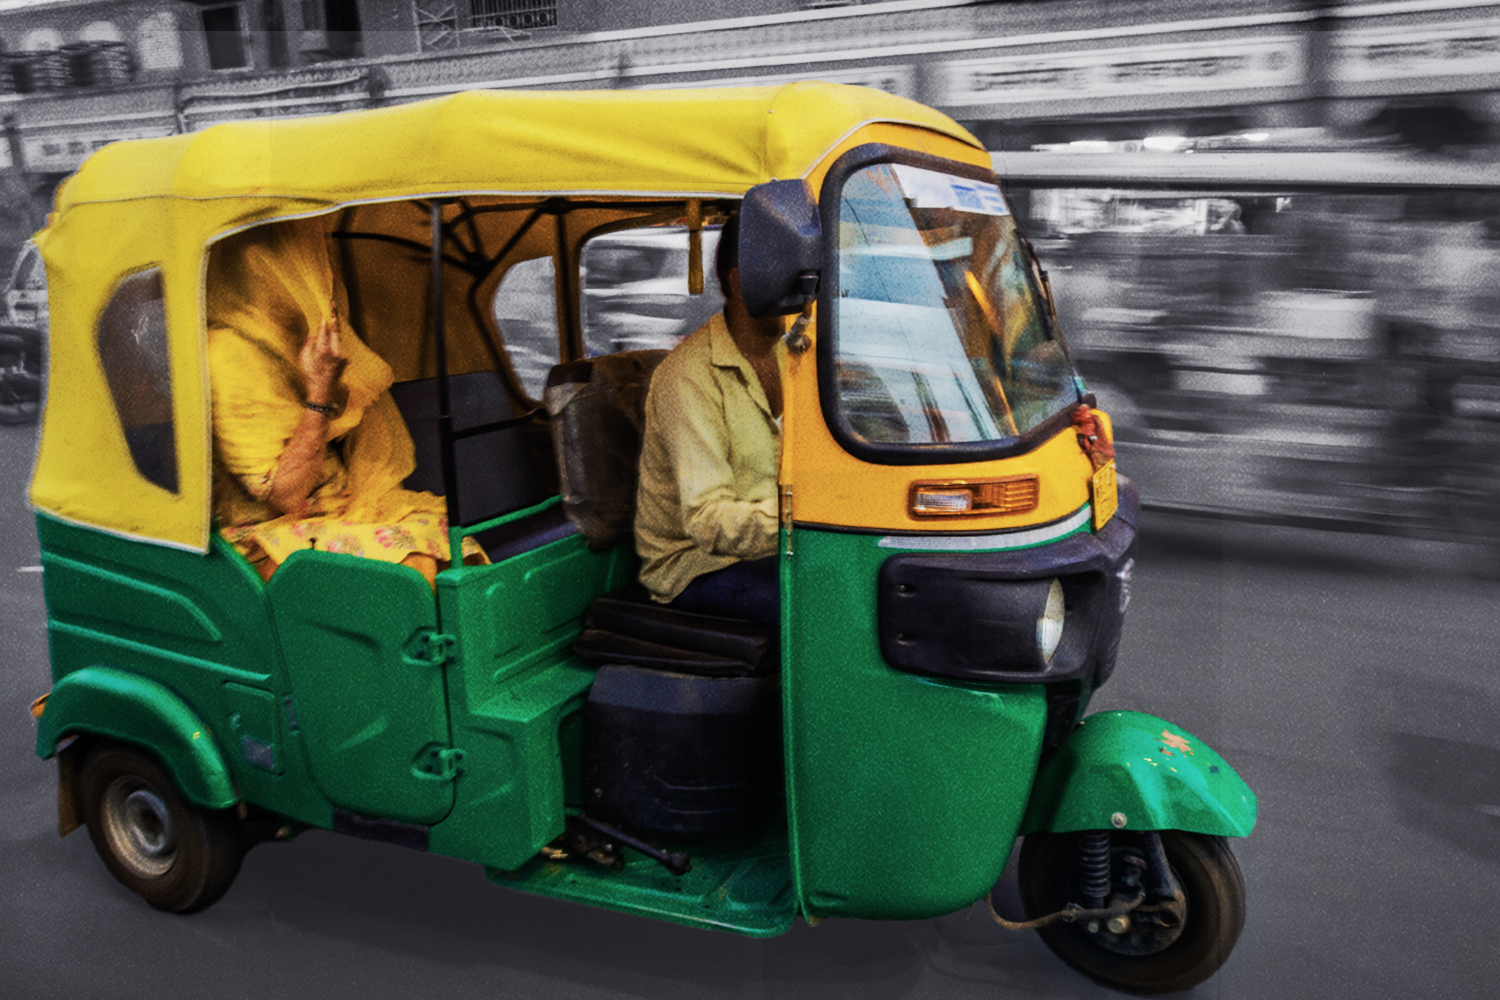 A man drives a three-wheeled auto rickshaw through the streets of Rajasthan, India. The auto rickshaw is yellow and green and the background is black and white. A woman wearing yellow sits in the backseat, her dupatta covering her face.